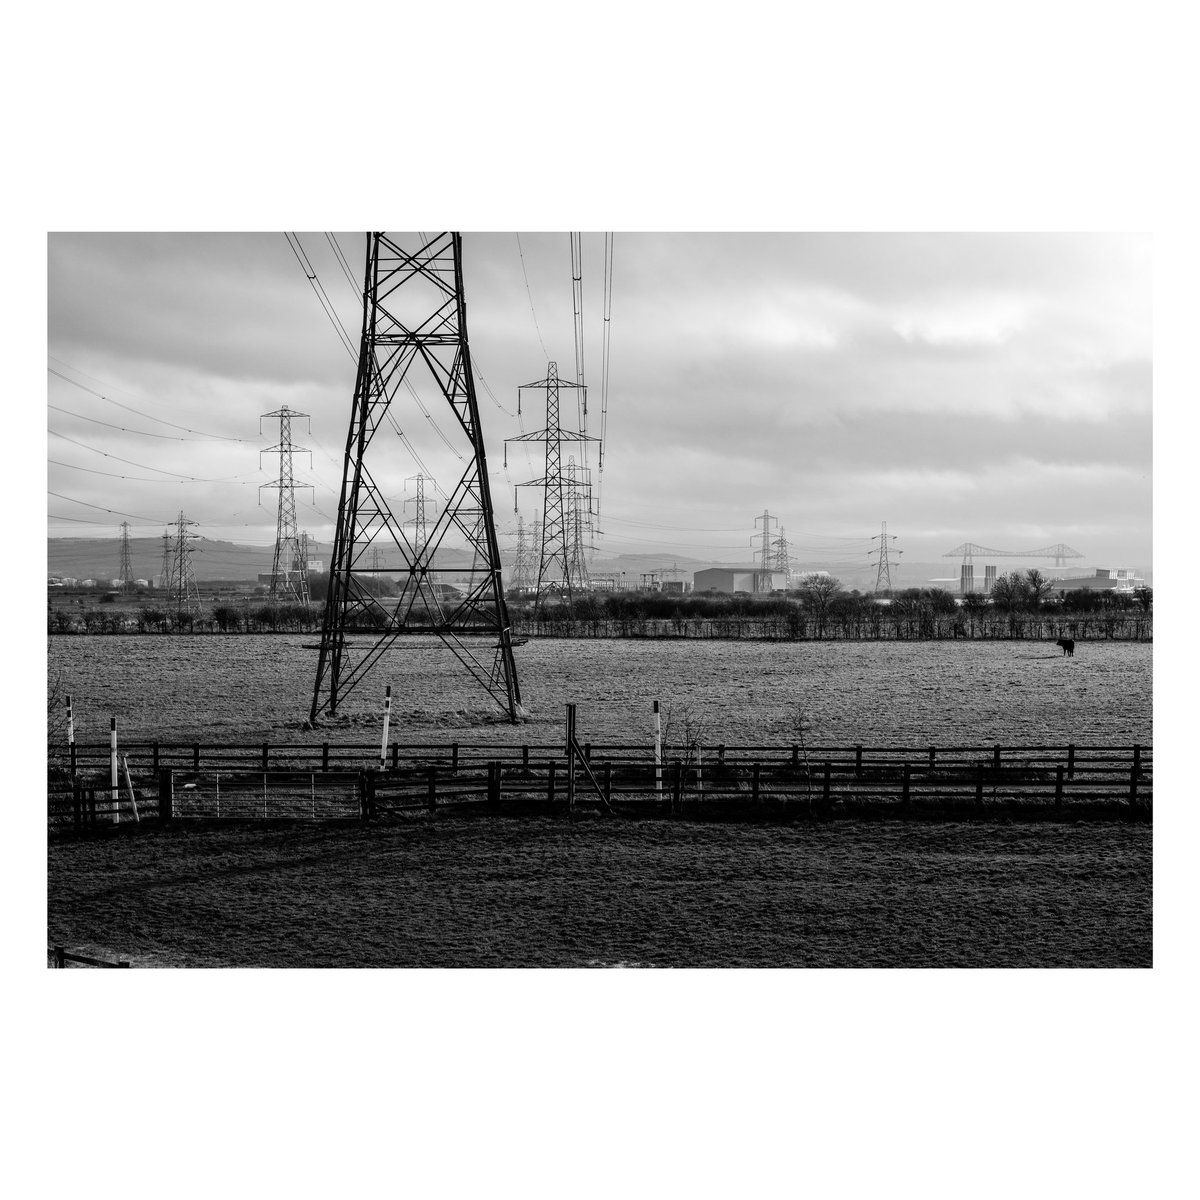 #pylons view towards #Middlesbrough #teestransporterbridge can just about be made out. #northeast #england #blackandwhitephotography #landscapephotography #bnwphotography #hartlepool